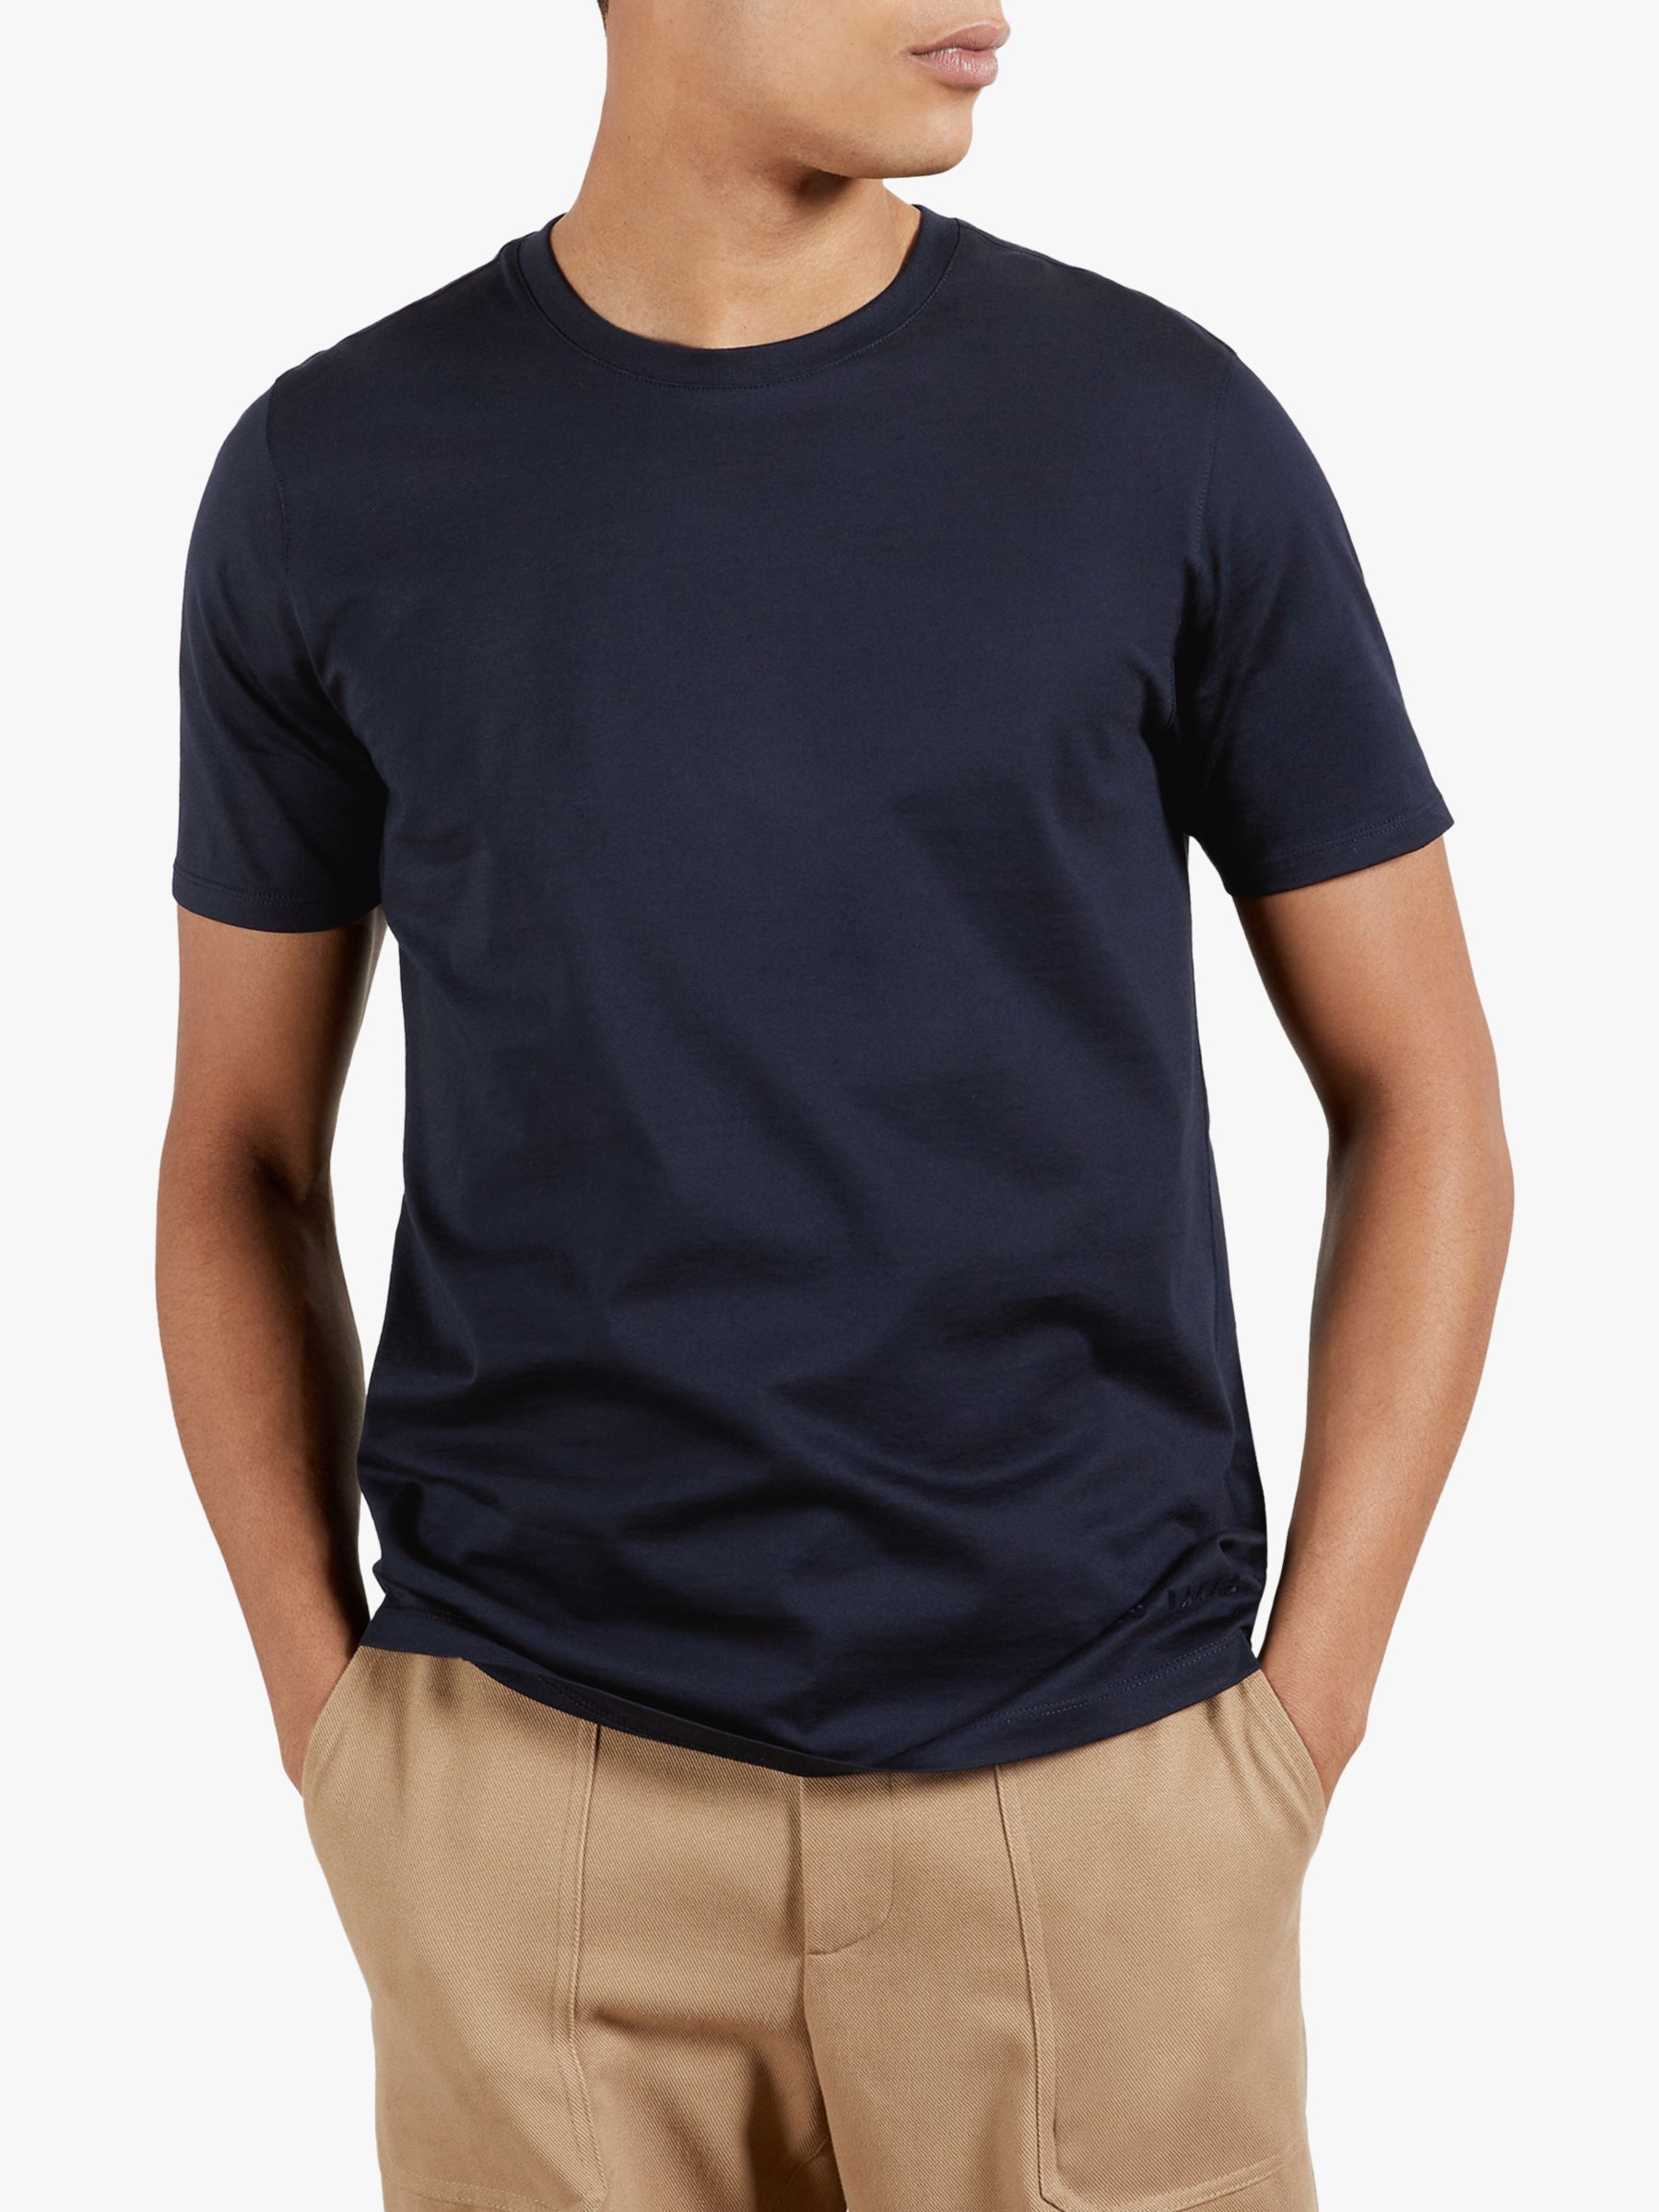 Ted Baker Only Crew Neck T-Shirt, Navy at John Lewis & Partners